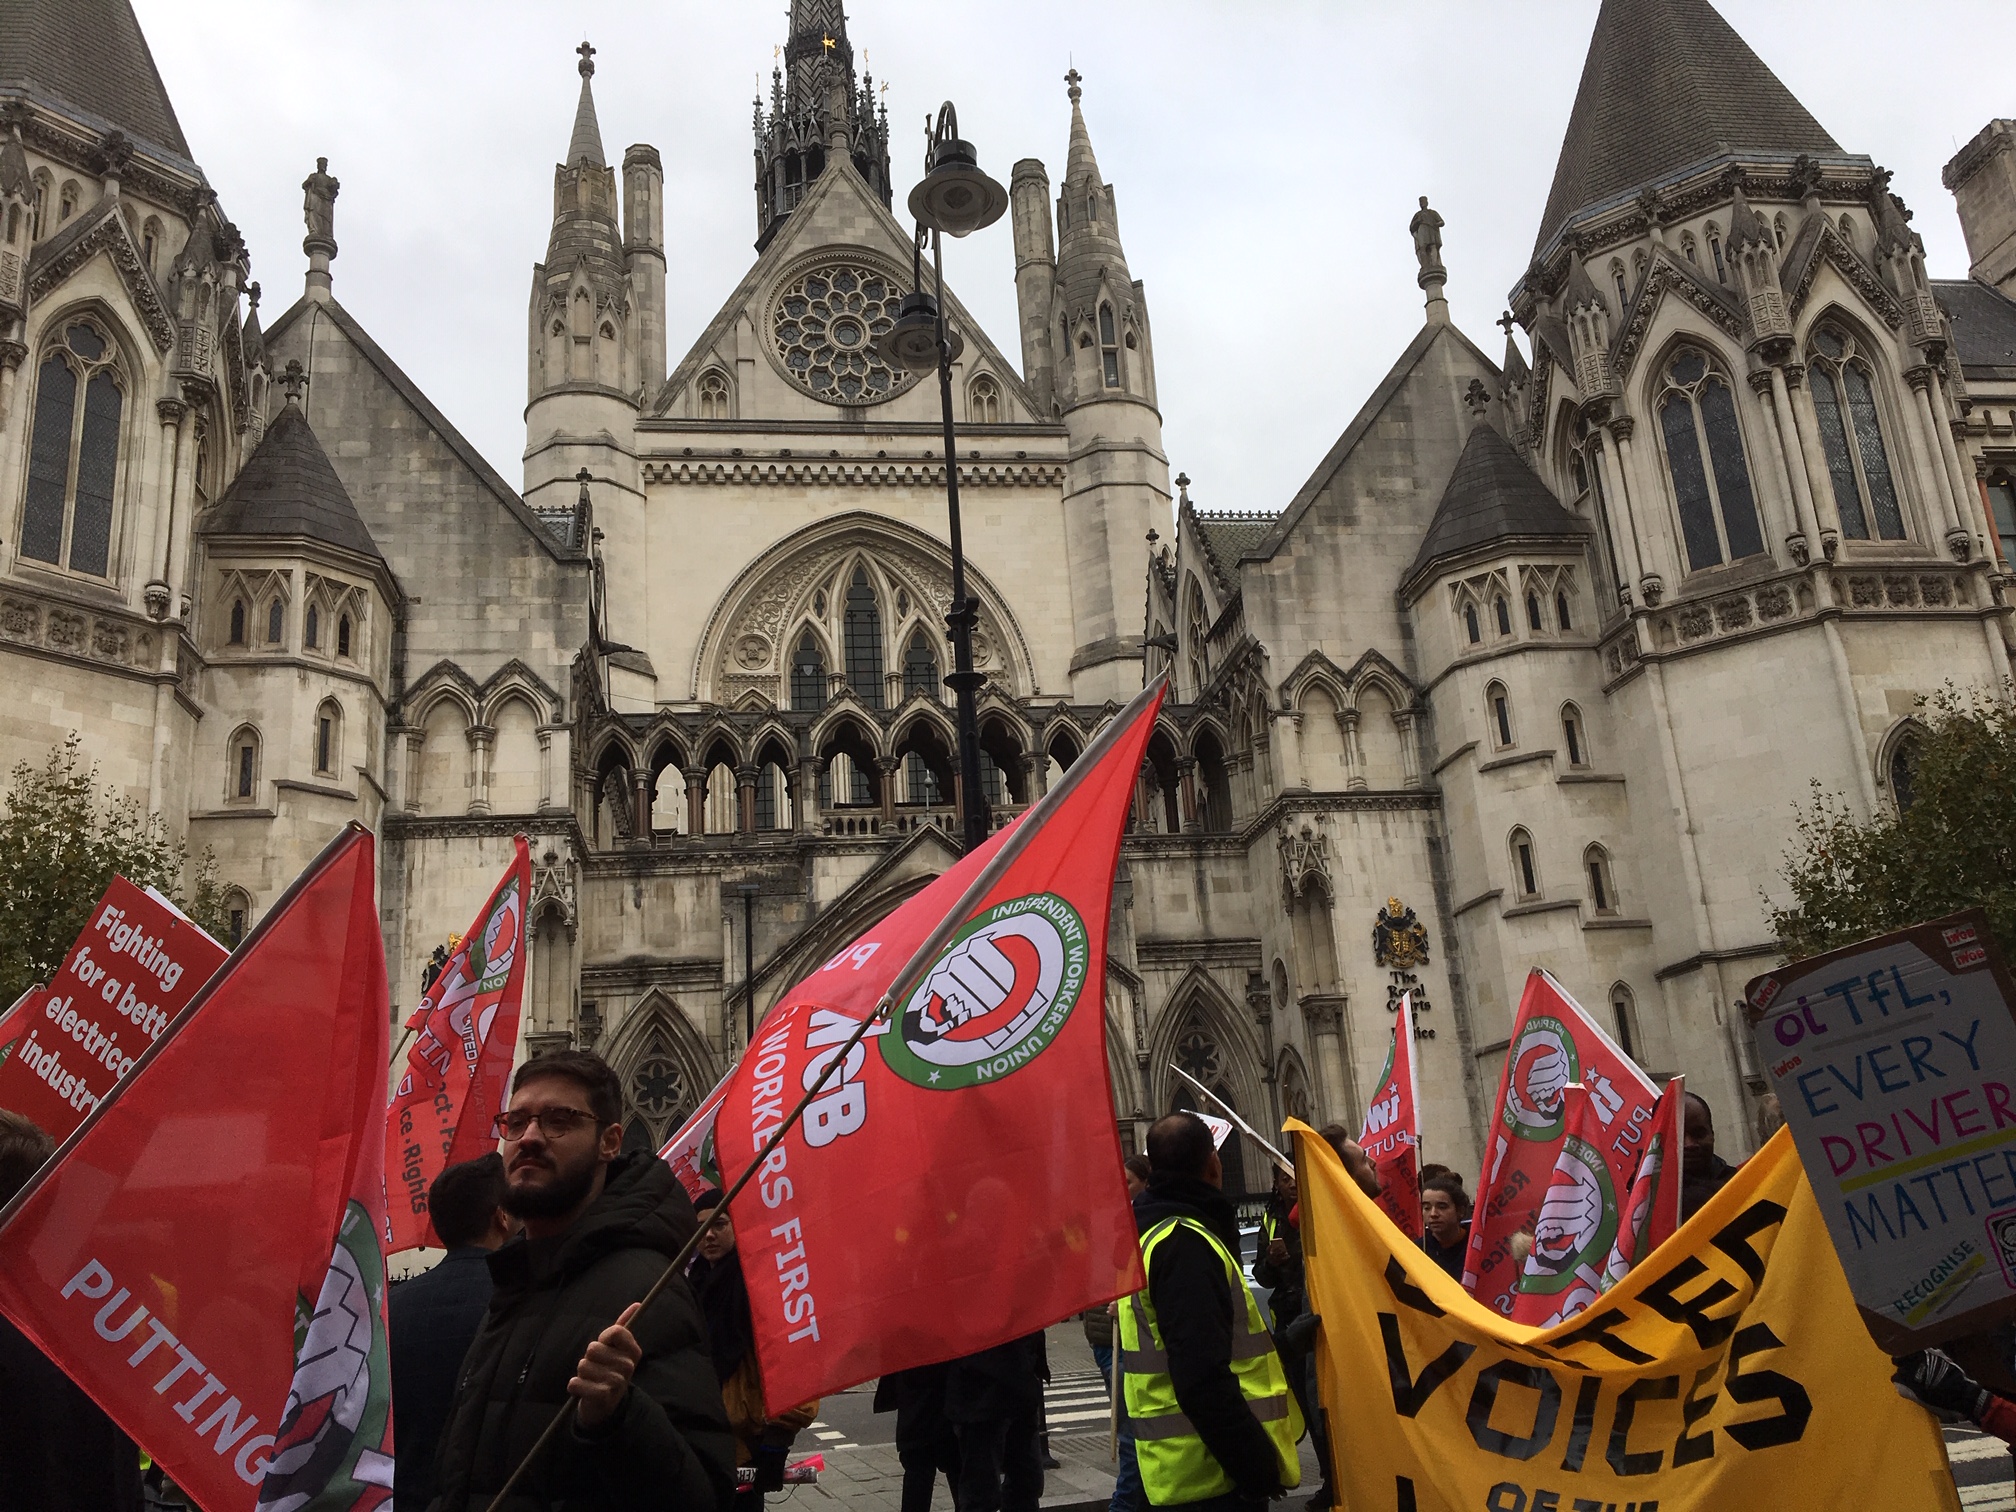 Precarious workers march against the gig economy, 30.10.18, credit: Paula Mitchell (uploaded 30/10/2018)